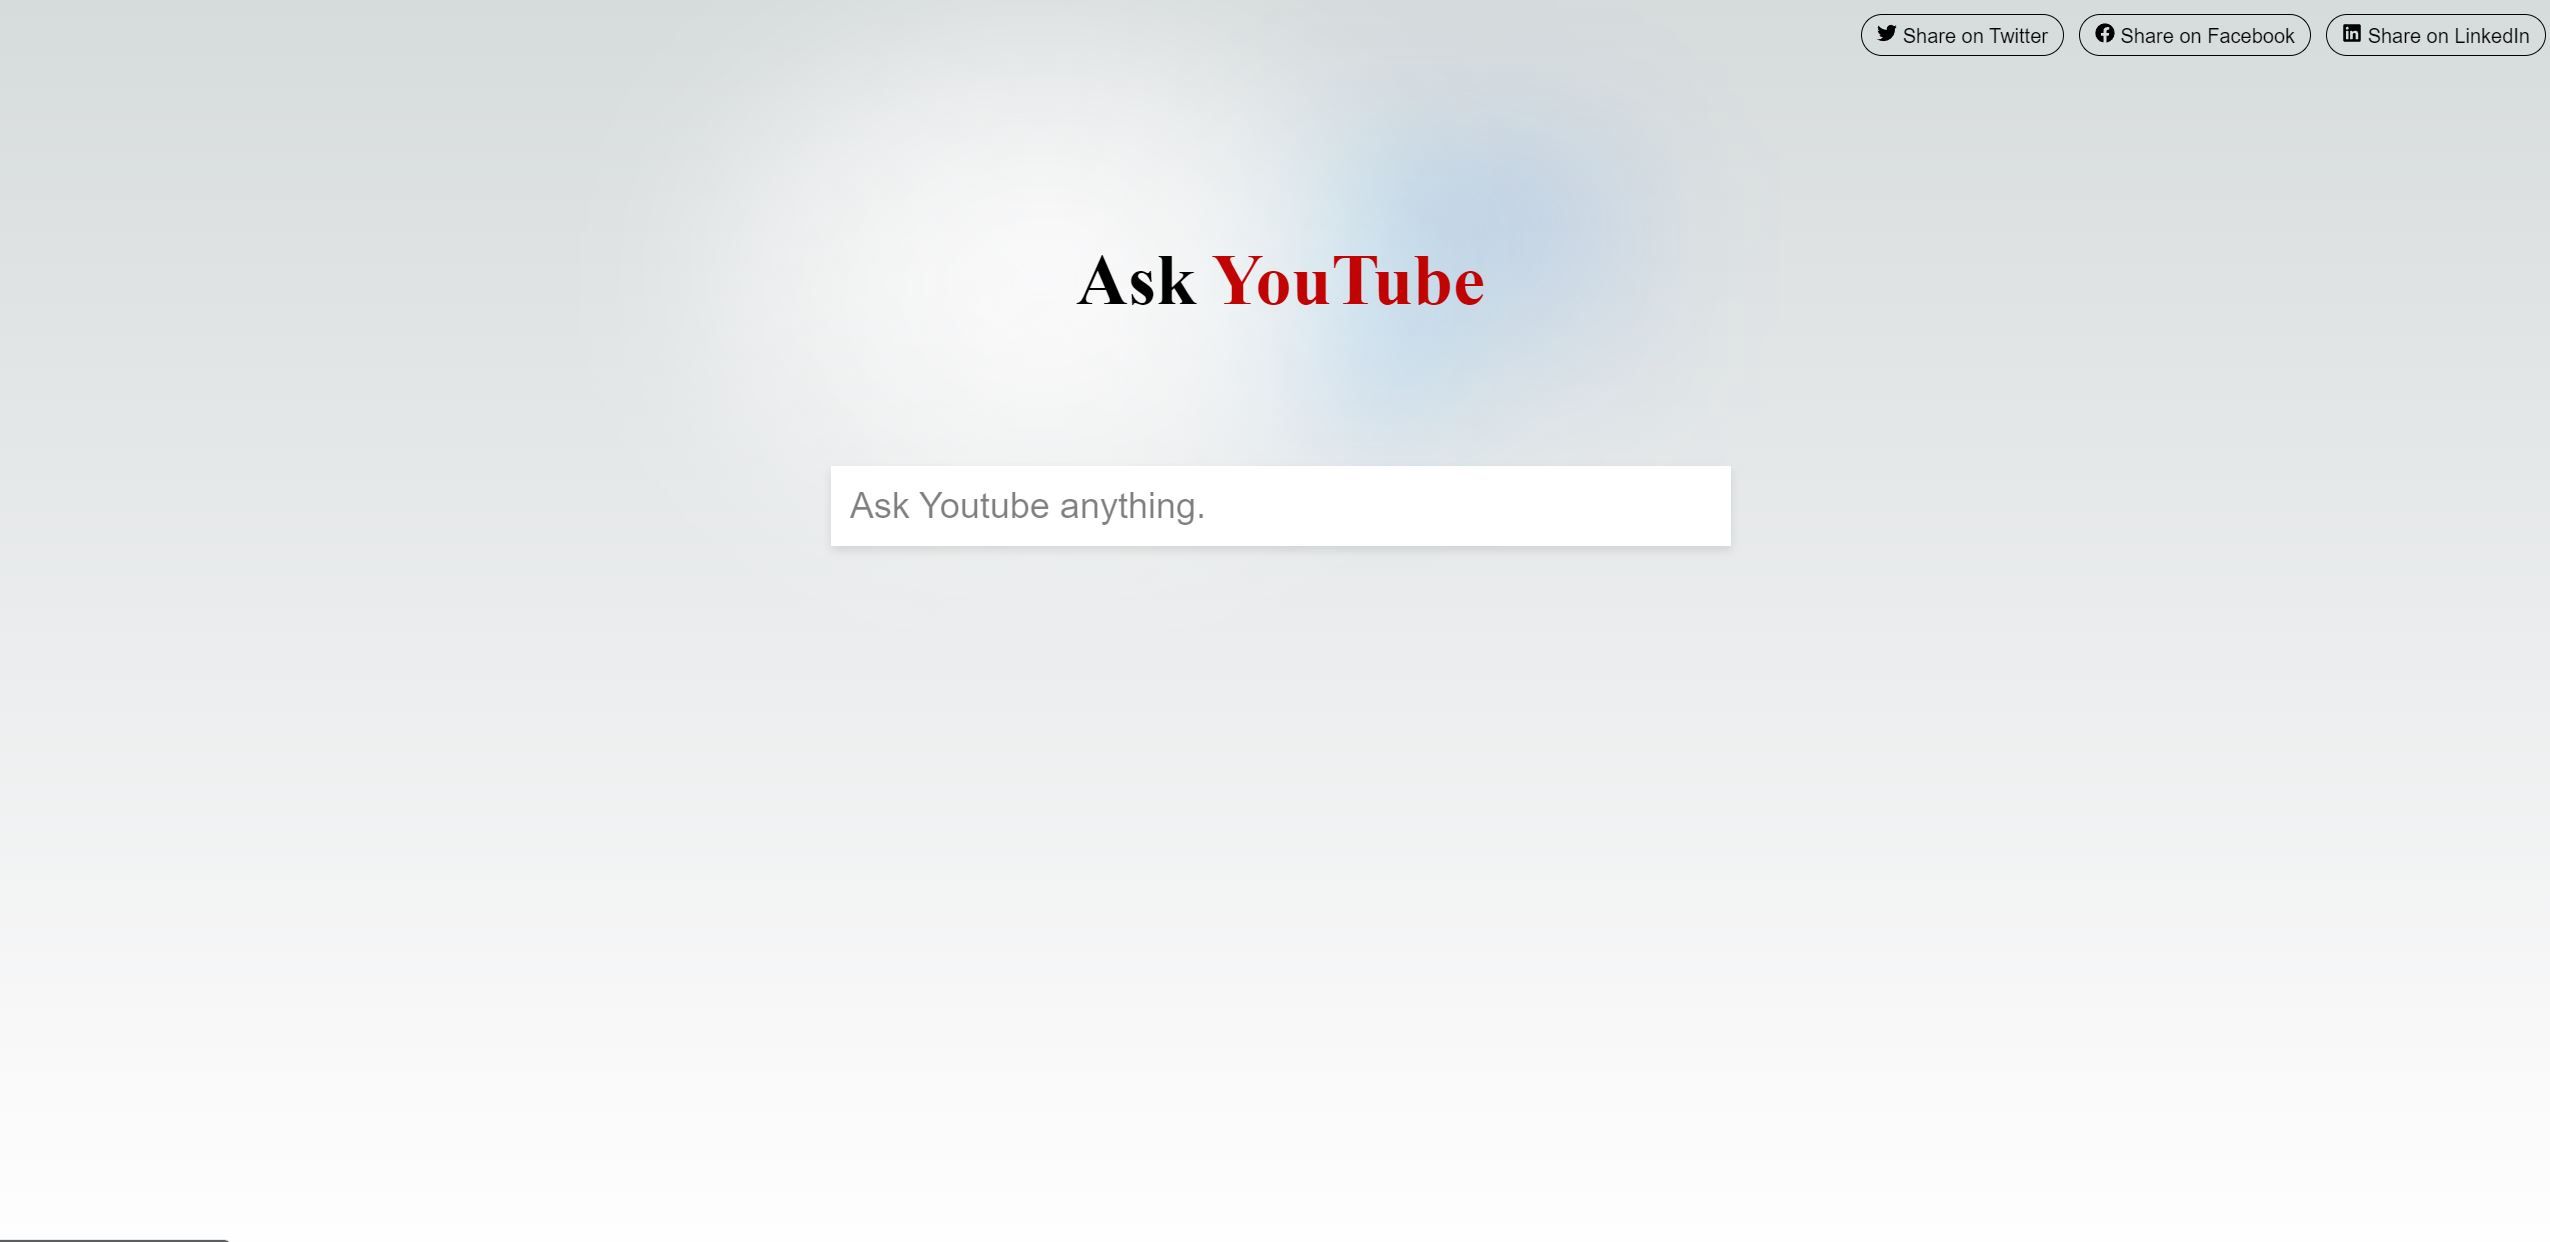  AskYoutube is an AI-powered tool that allows